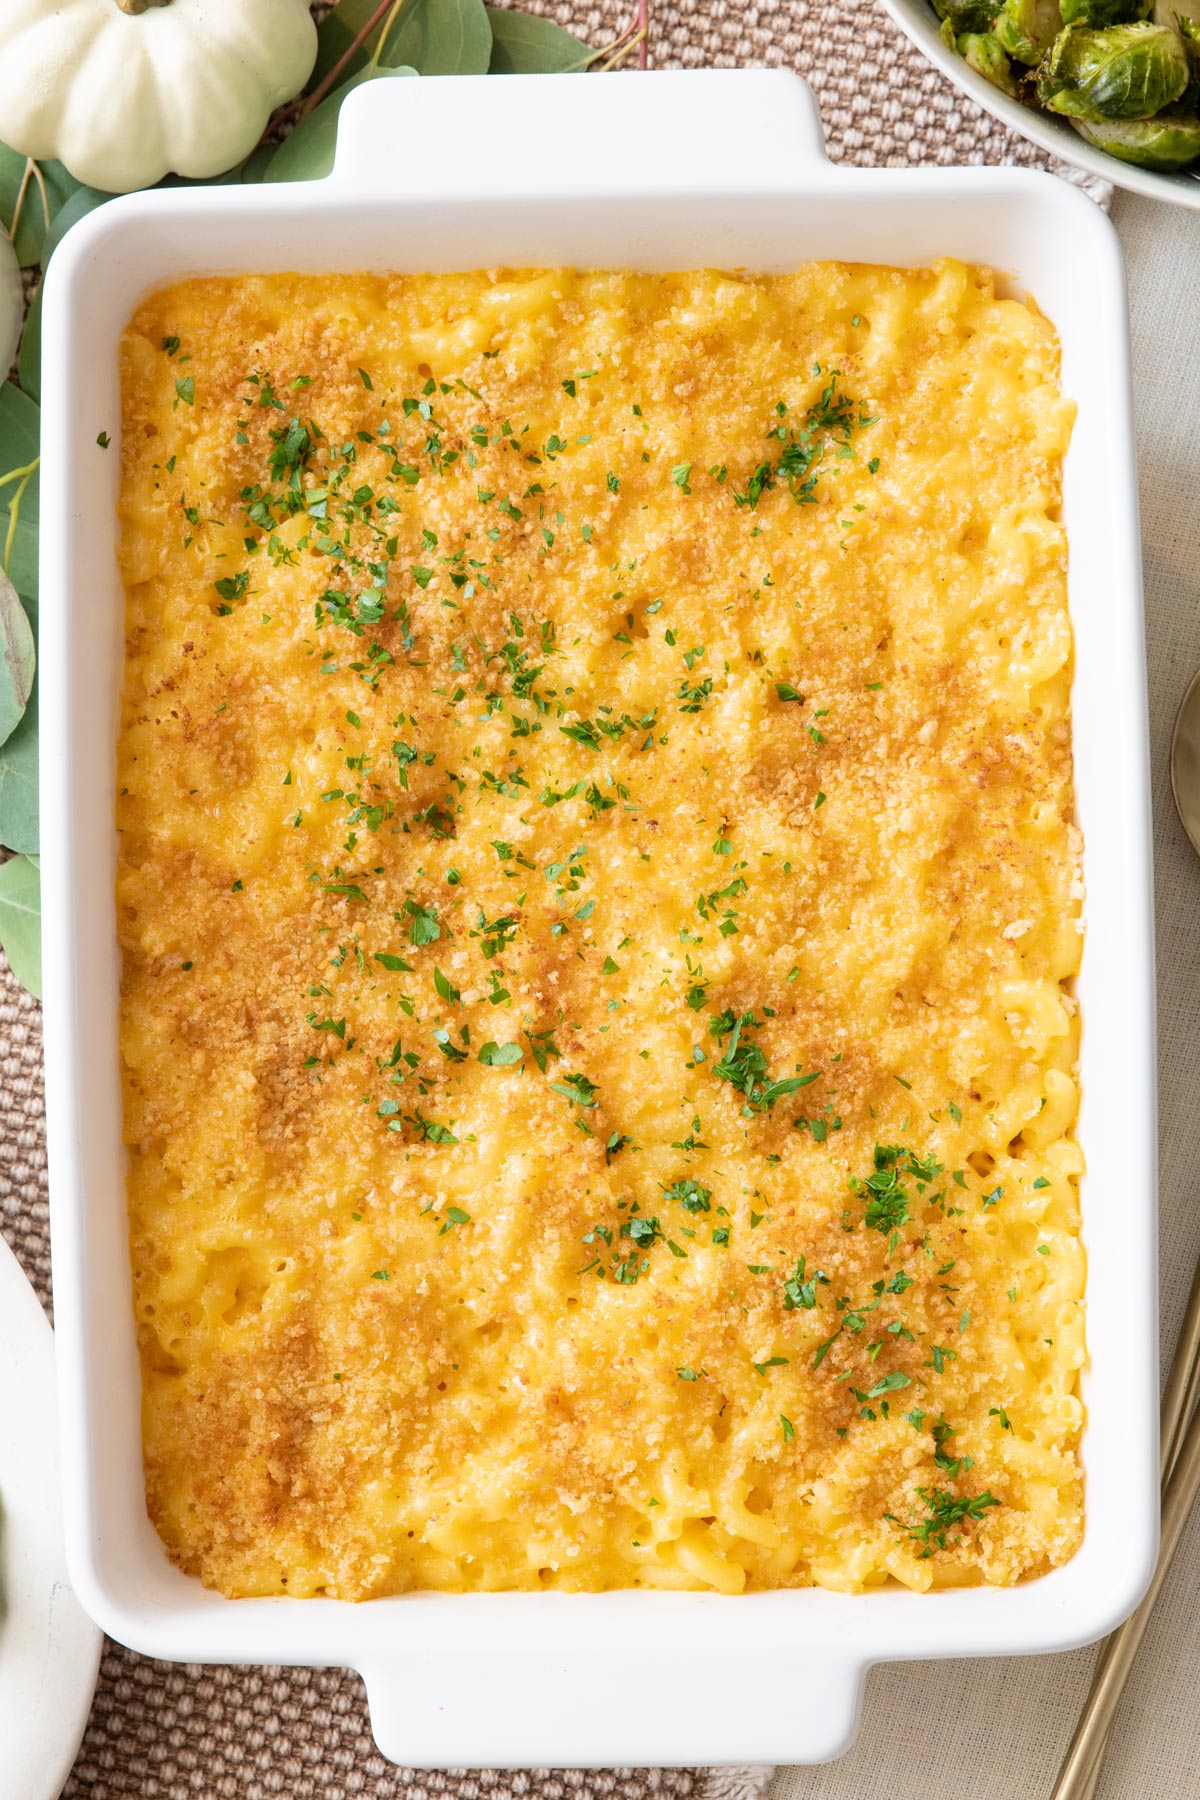 Baked macaroni and cheese in rectangle white baking dish garnished with fresh herbs.